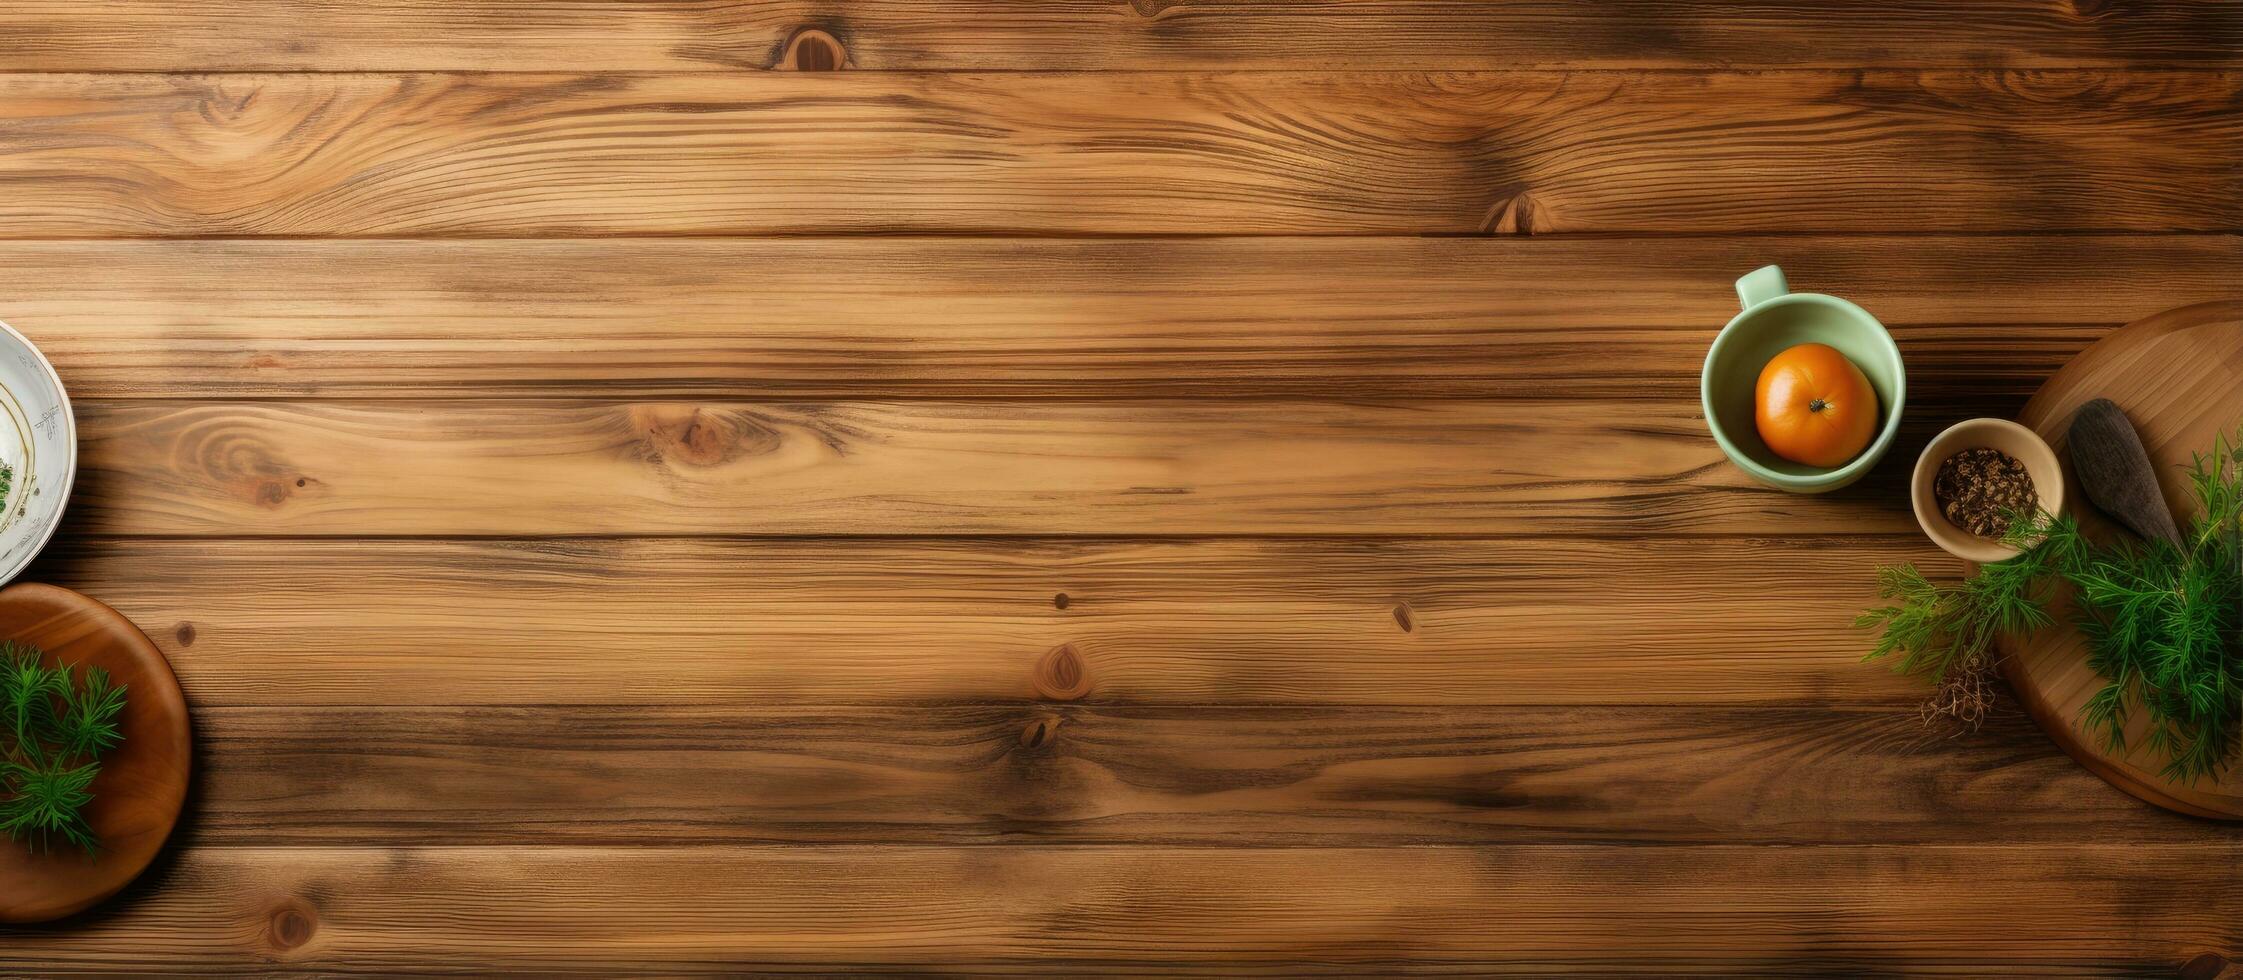 Closeup of wooden kitchen board in home interior concept photo